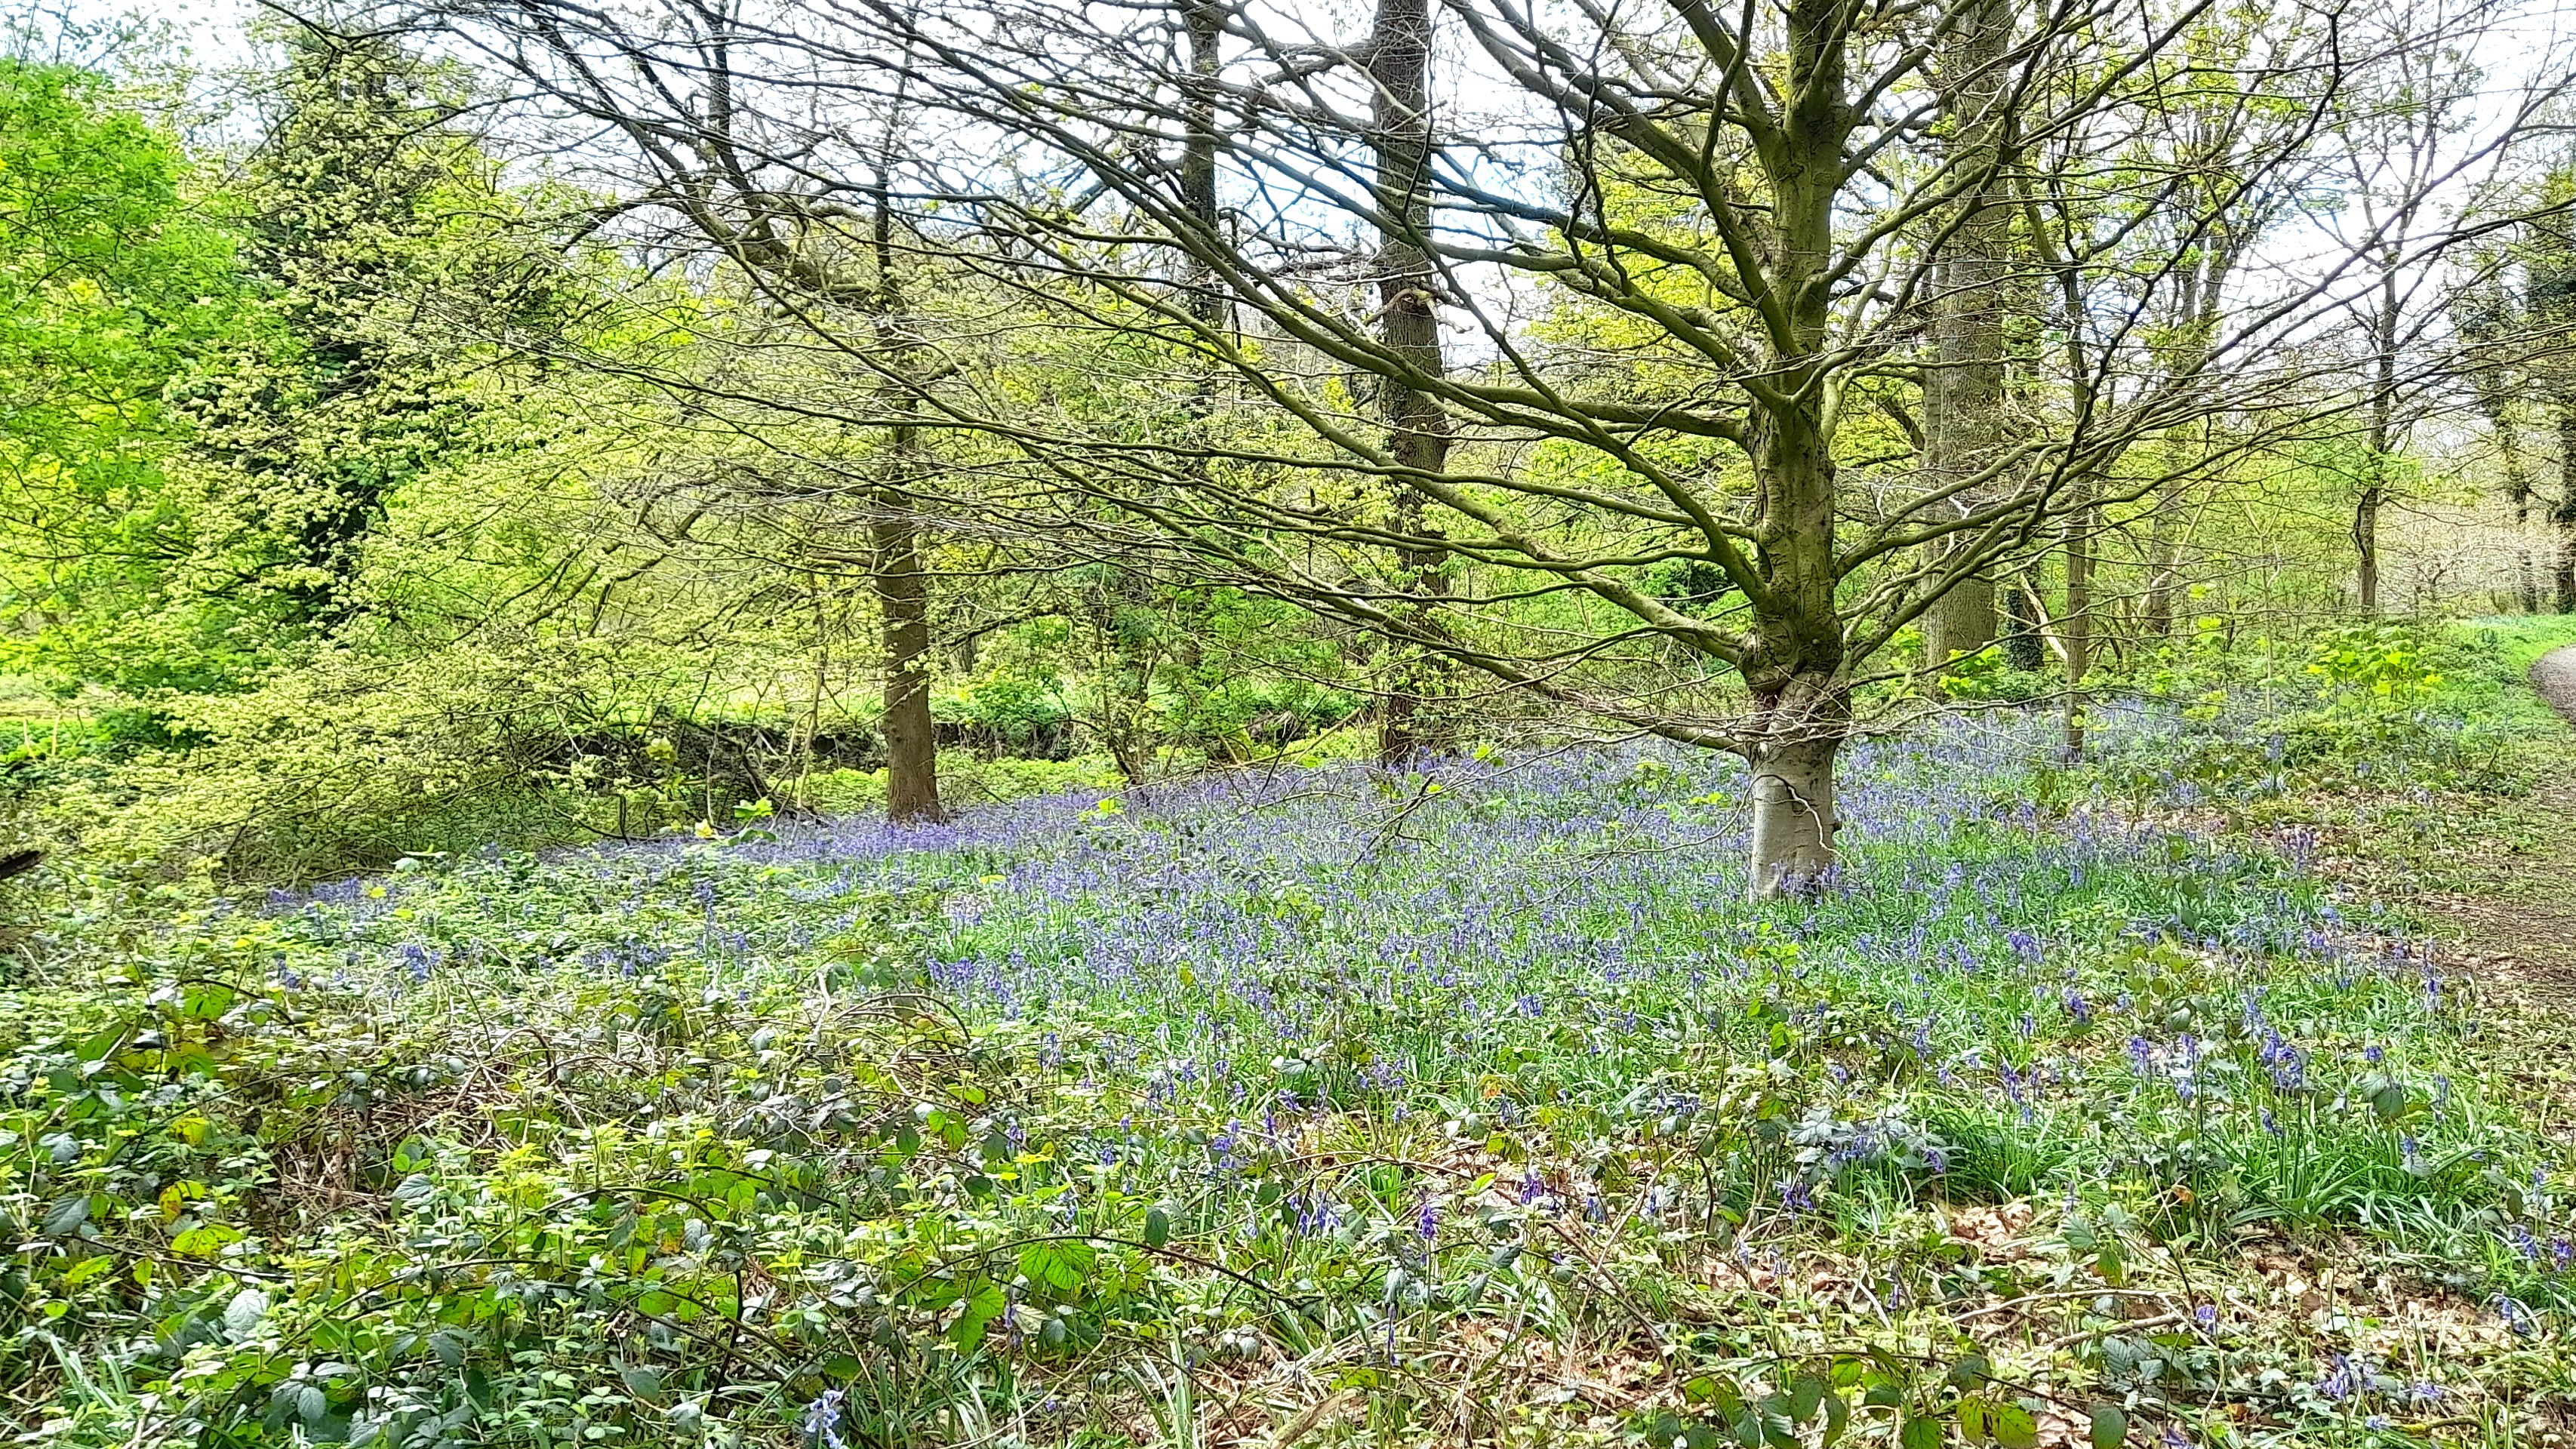 a mass of bluebells on the woodland floor